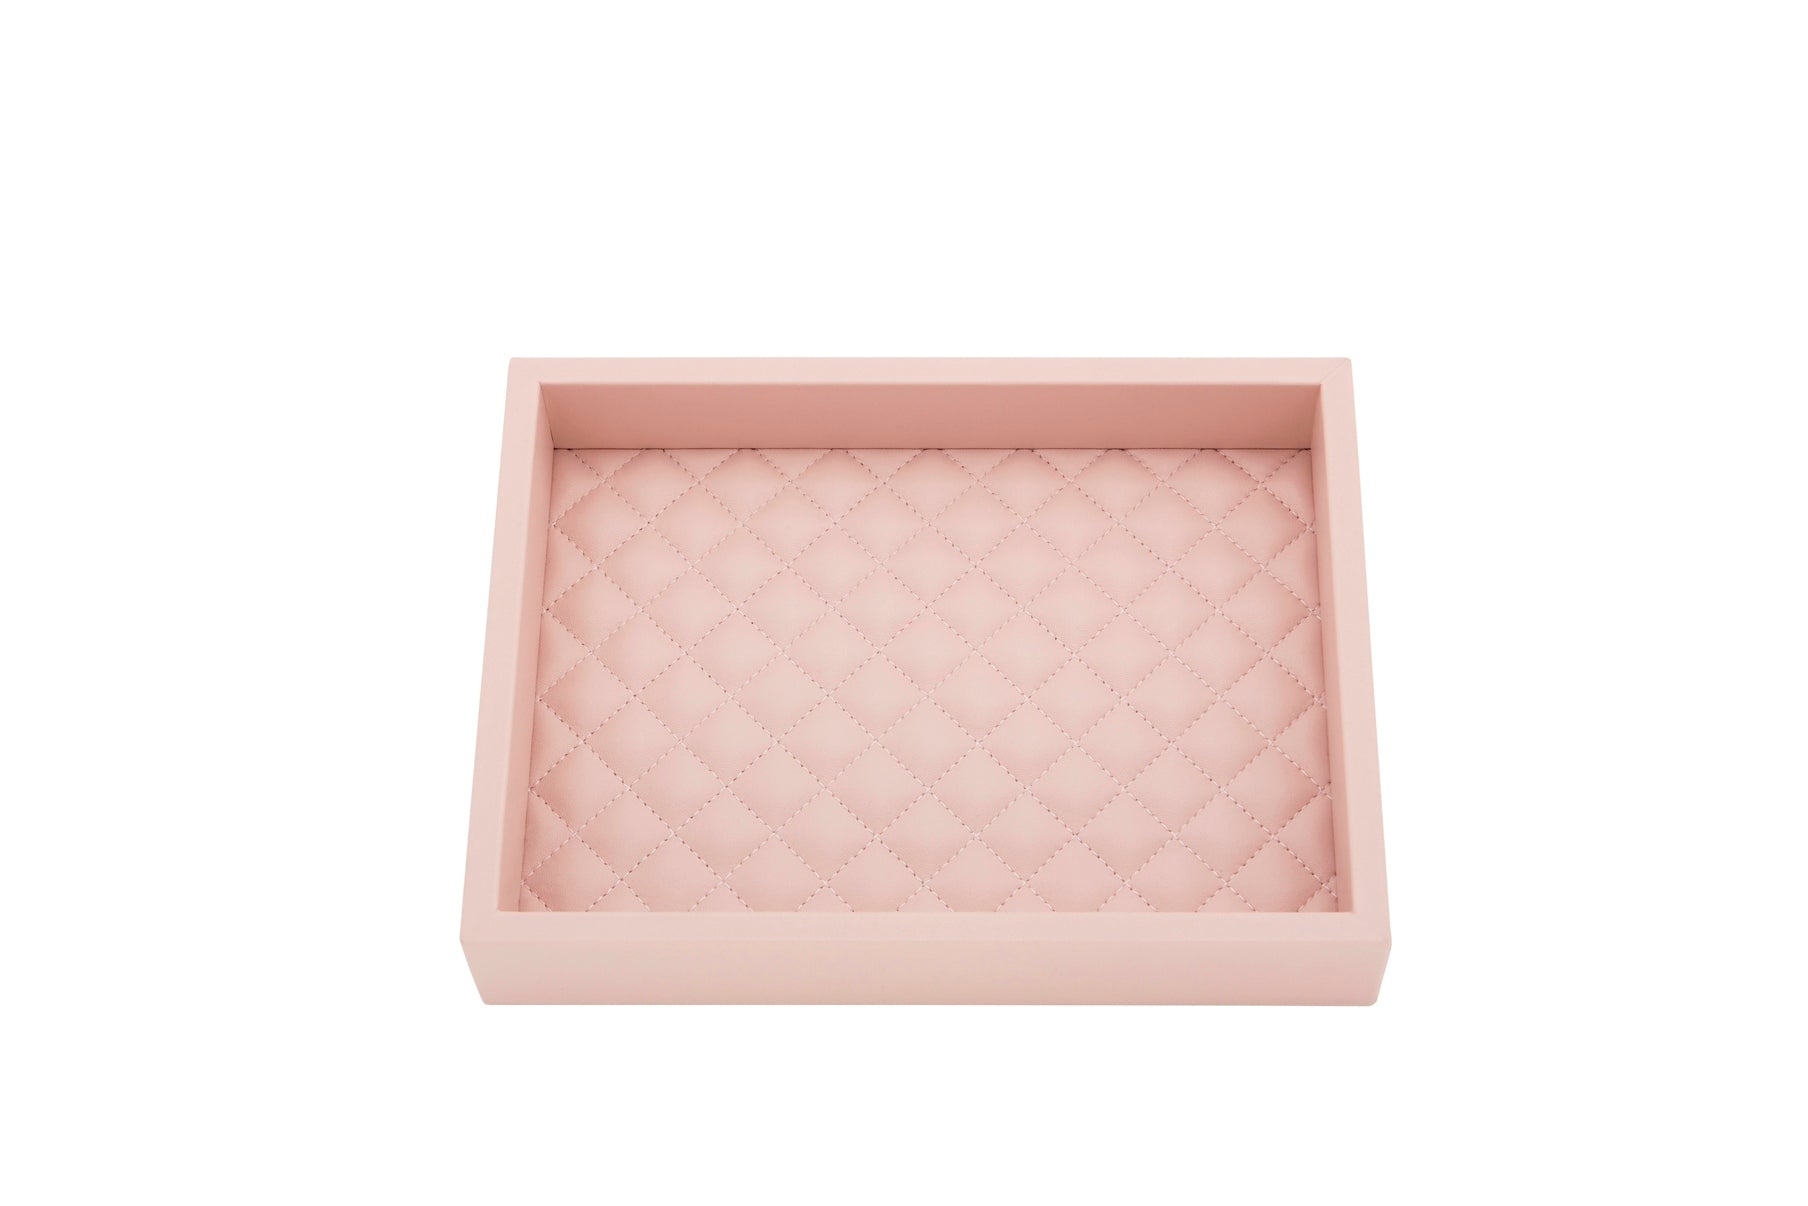 Riviere Febe Diamonds Rectangular Valet Tray | Leather Tray | Quilted Diamonds Padded Lining | Perfect for Yacht Decor | Available at 2Jour Concierge, #1 luxury high-end gift & lifestyle shop